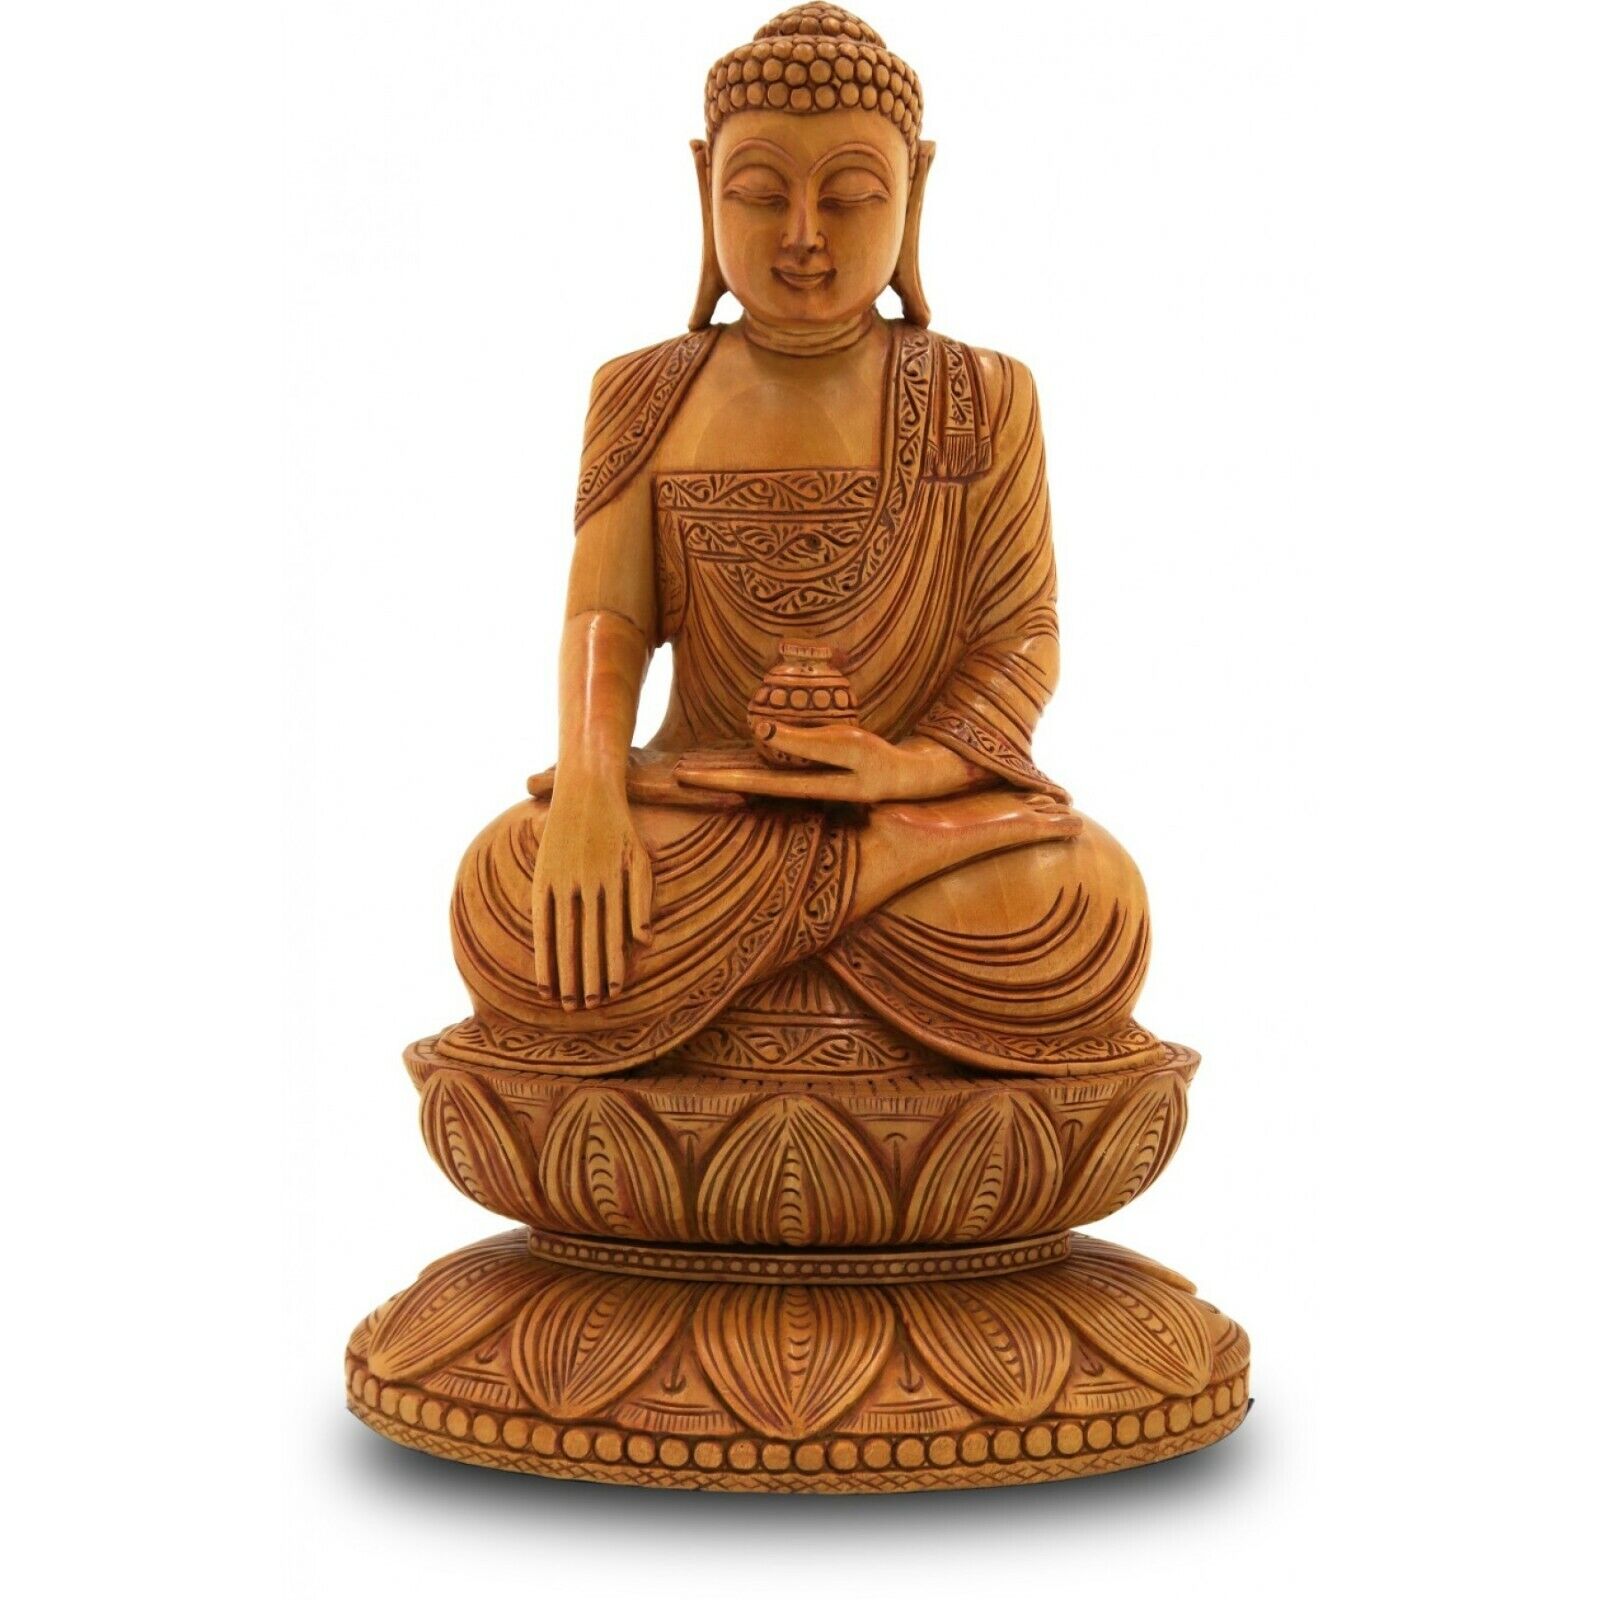 Beautiful Handcrafted Wooden Lord Gautam Buddha Meditating Statue From India-DP2